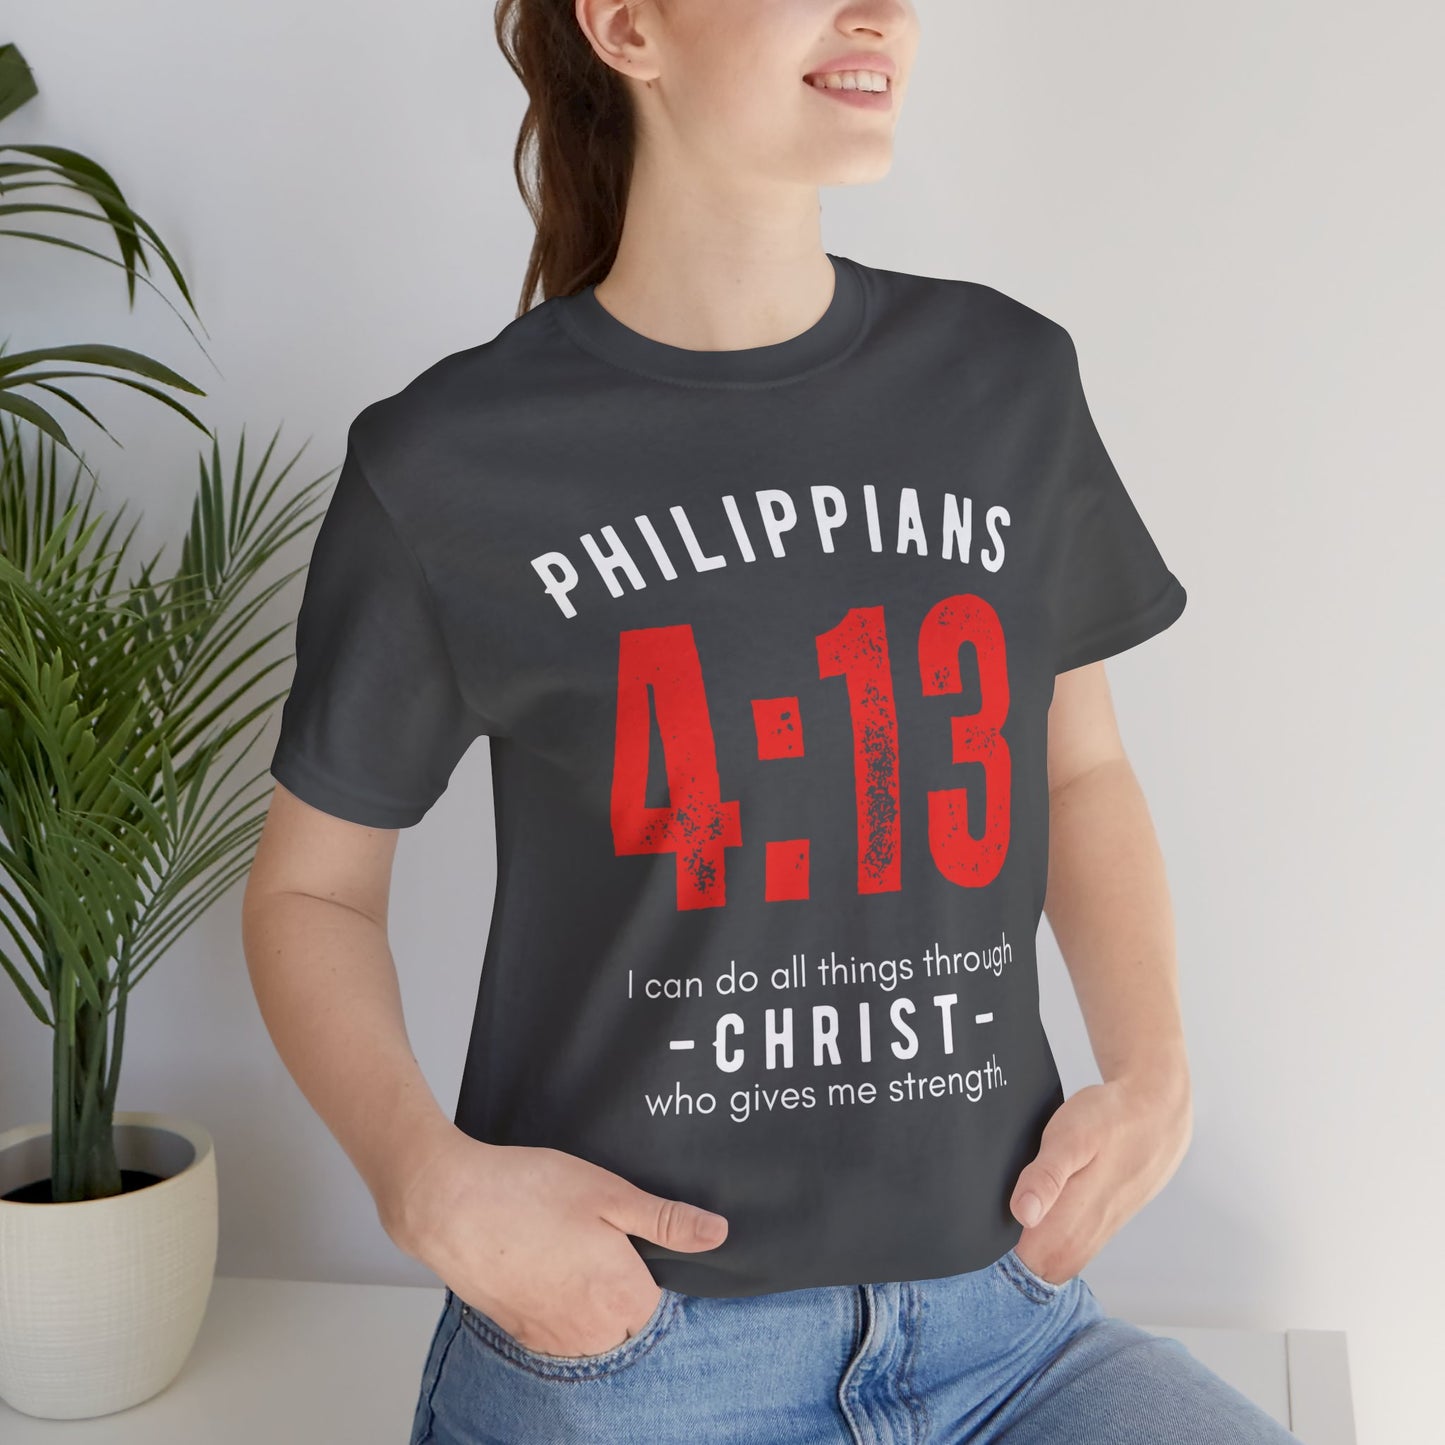 Philippians 4:13 "All Things In Christ" T-shirt for Men and Women 30% off